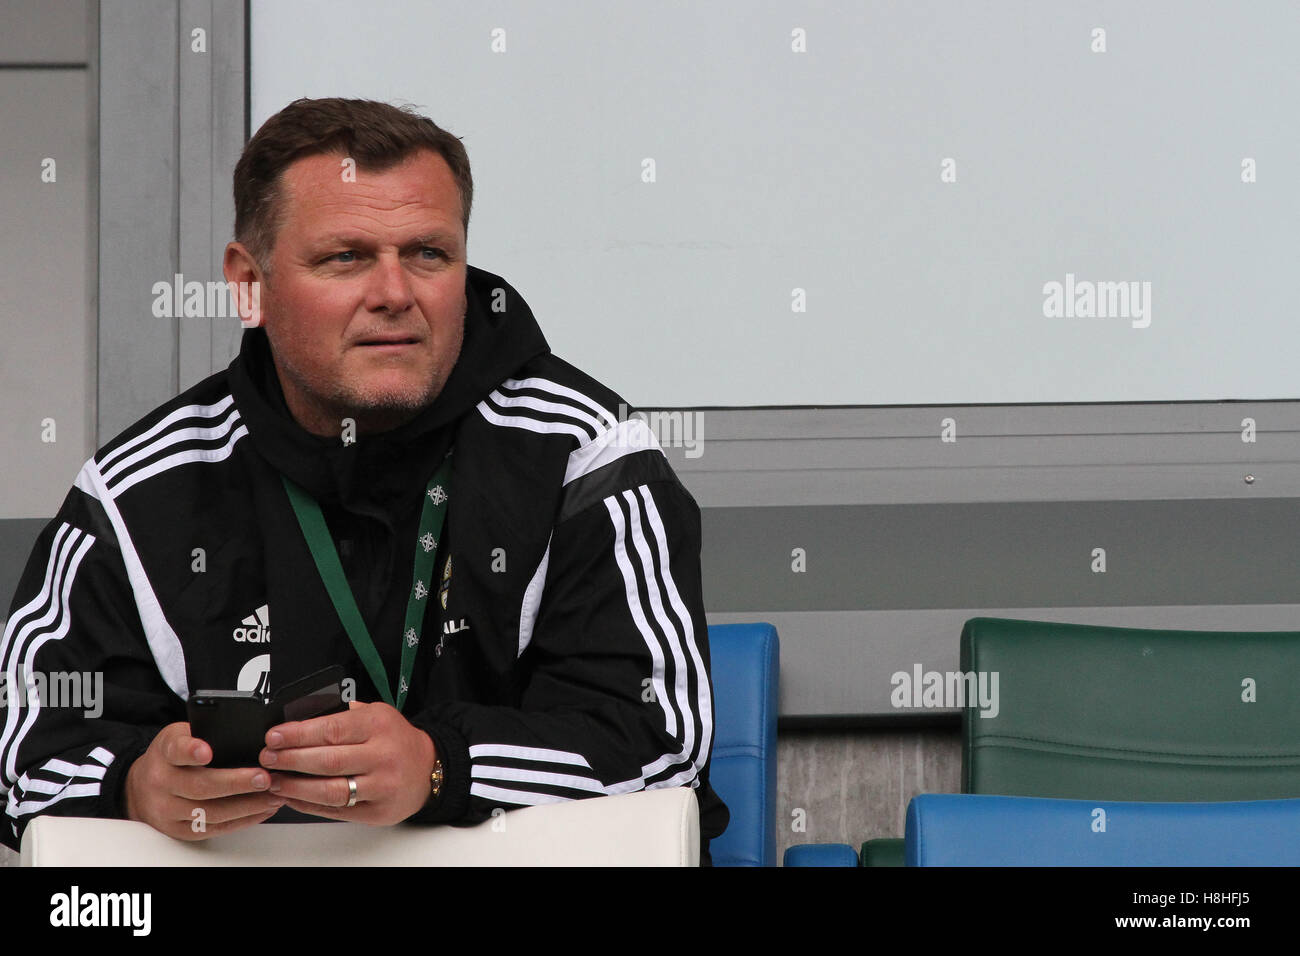 Windsor Park, Belfast. 26th May 2016. Northern Ireland U21 manager, and IFA Elite Performance Director, Jim Magilton at the full senior squad training session as Northern Ireland prepared for their international friendly against Belarus the next day. Stock Photo